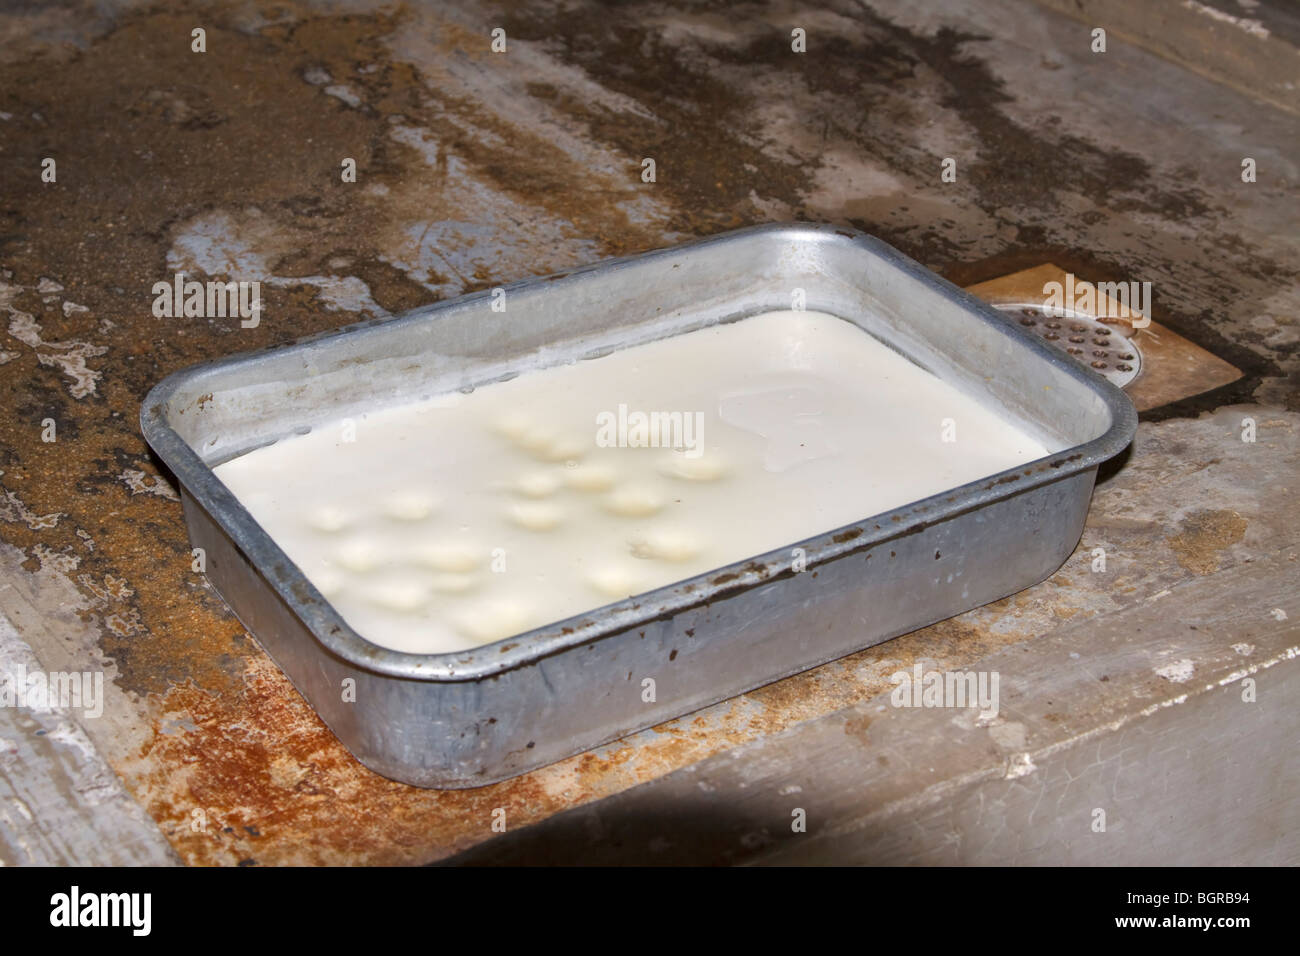 Latex is poured into pans after collection and coagulated using formic acid. Stock Photo